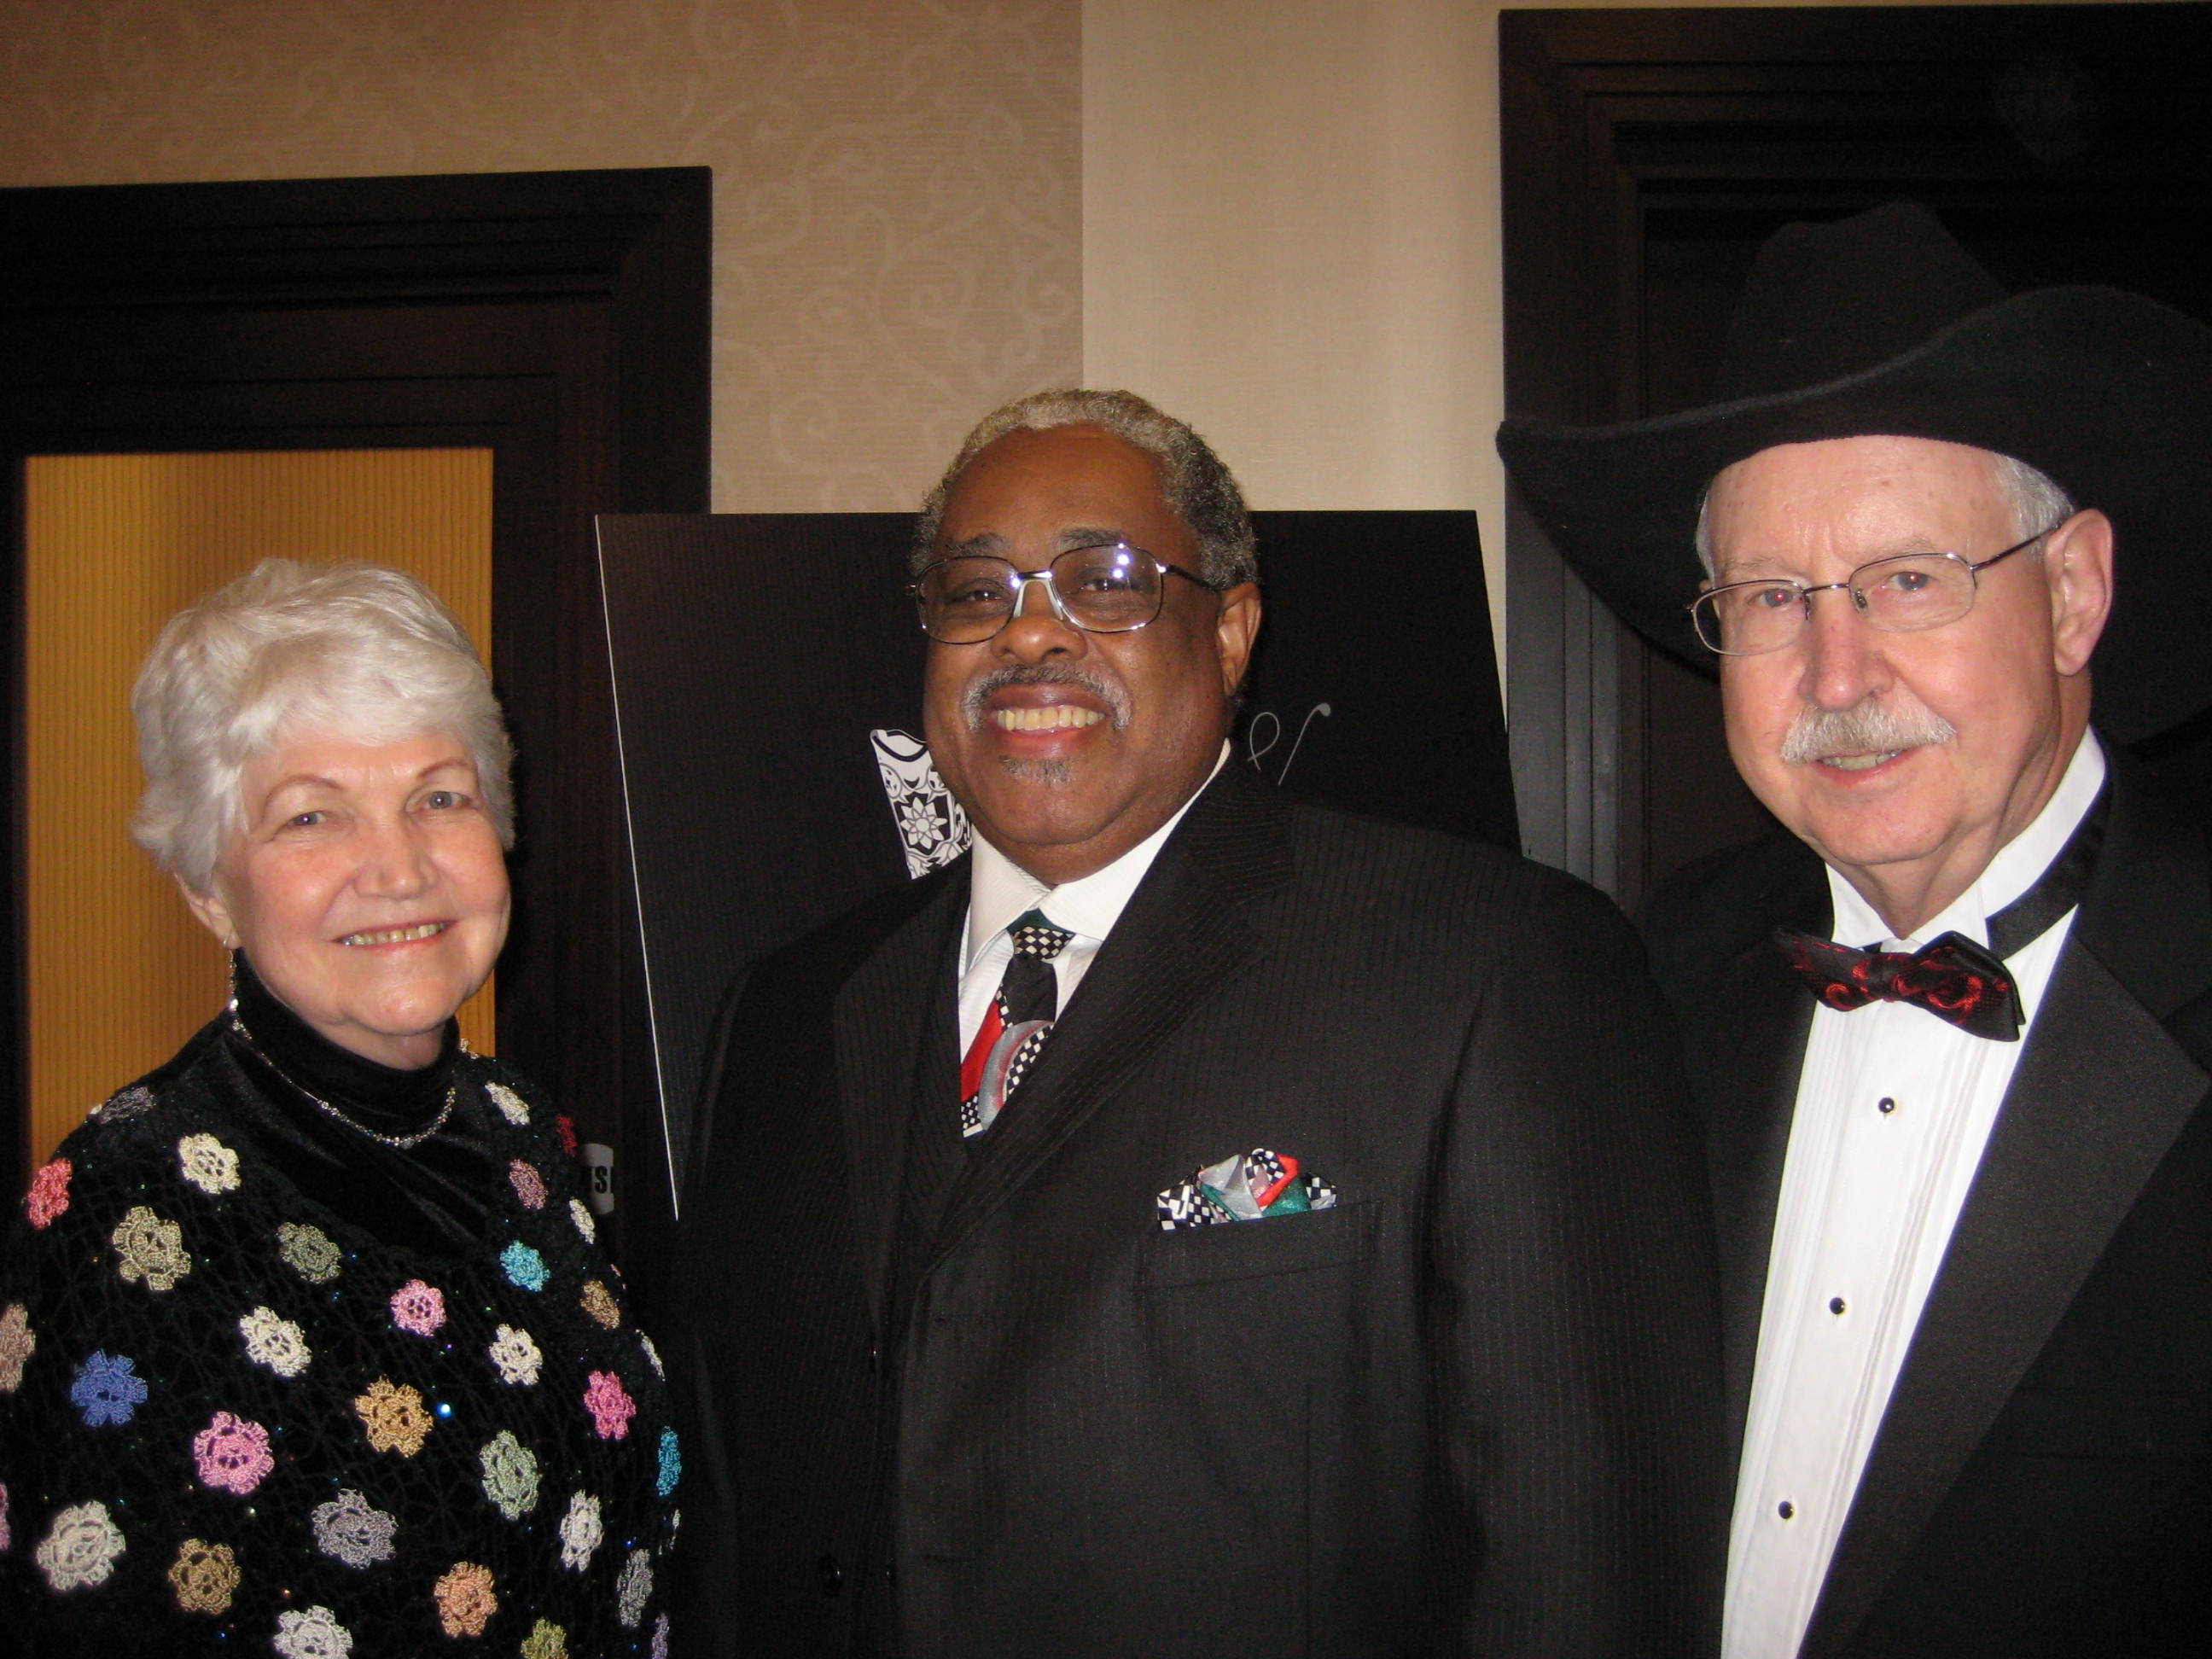 Fern Hill, Howard Wright and Jerry Hill at the Black Tie & Boots Gala in 2014.